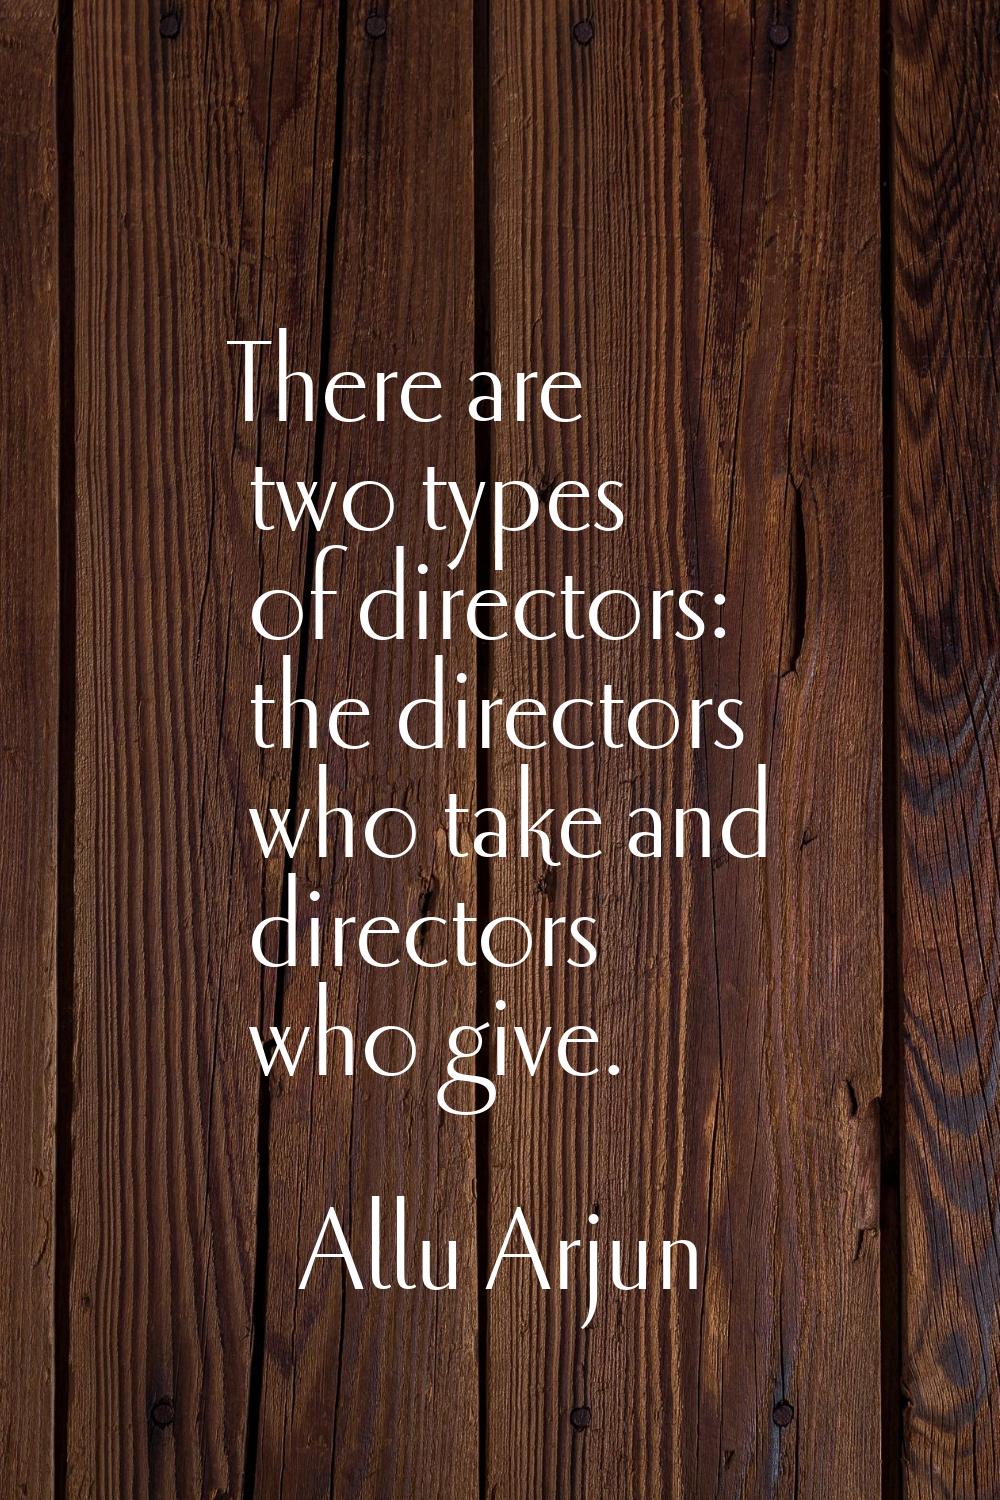 There are two types of directors: the directors who take and directors who give.